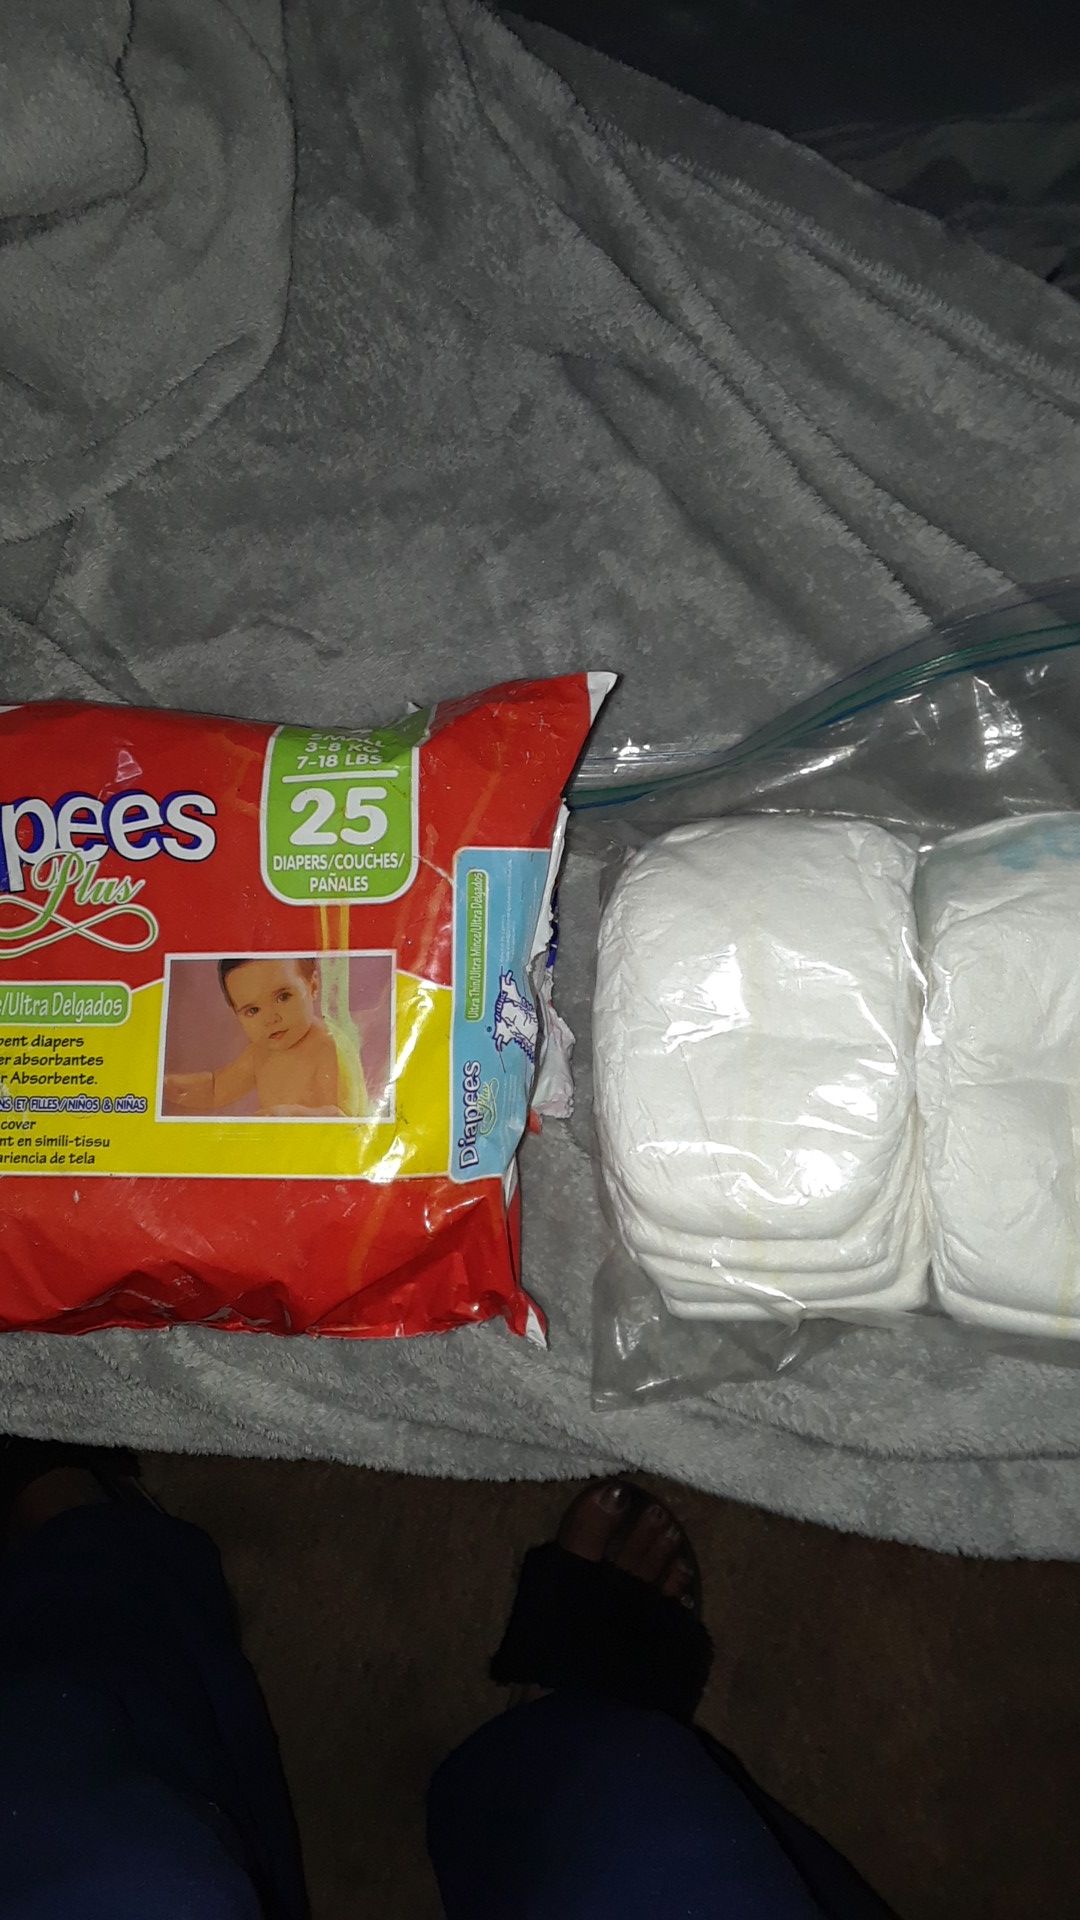 24 Free pampers size 2